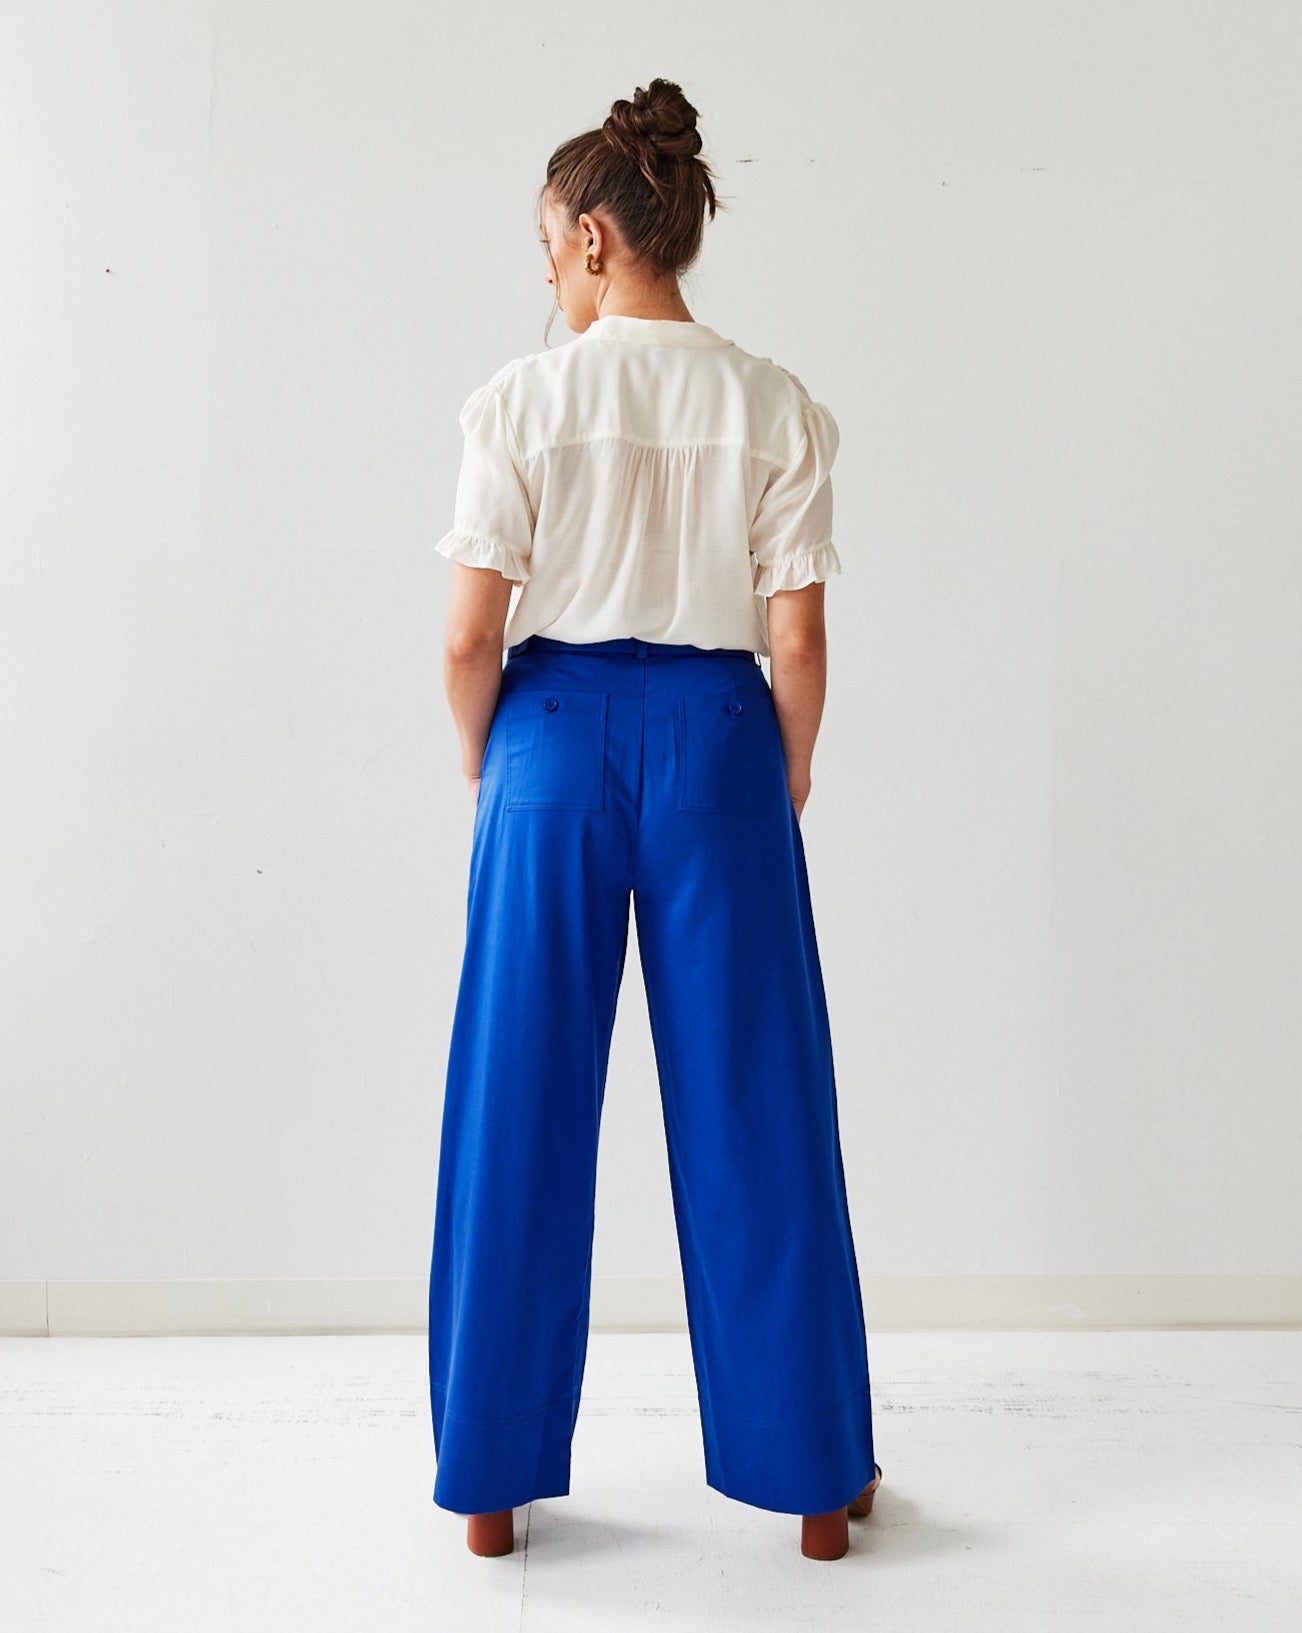 The Belted Trouser